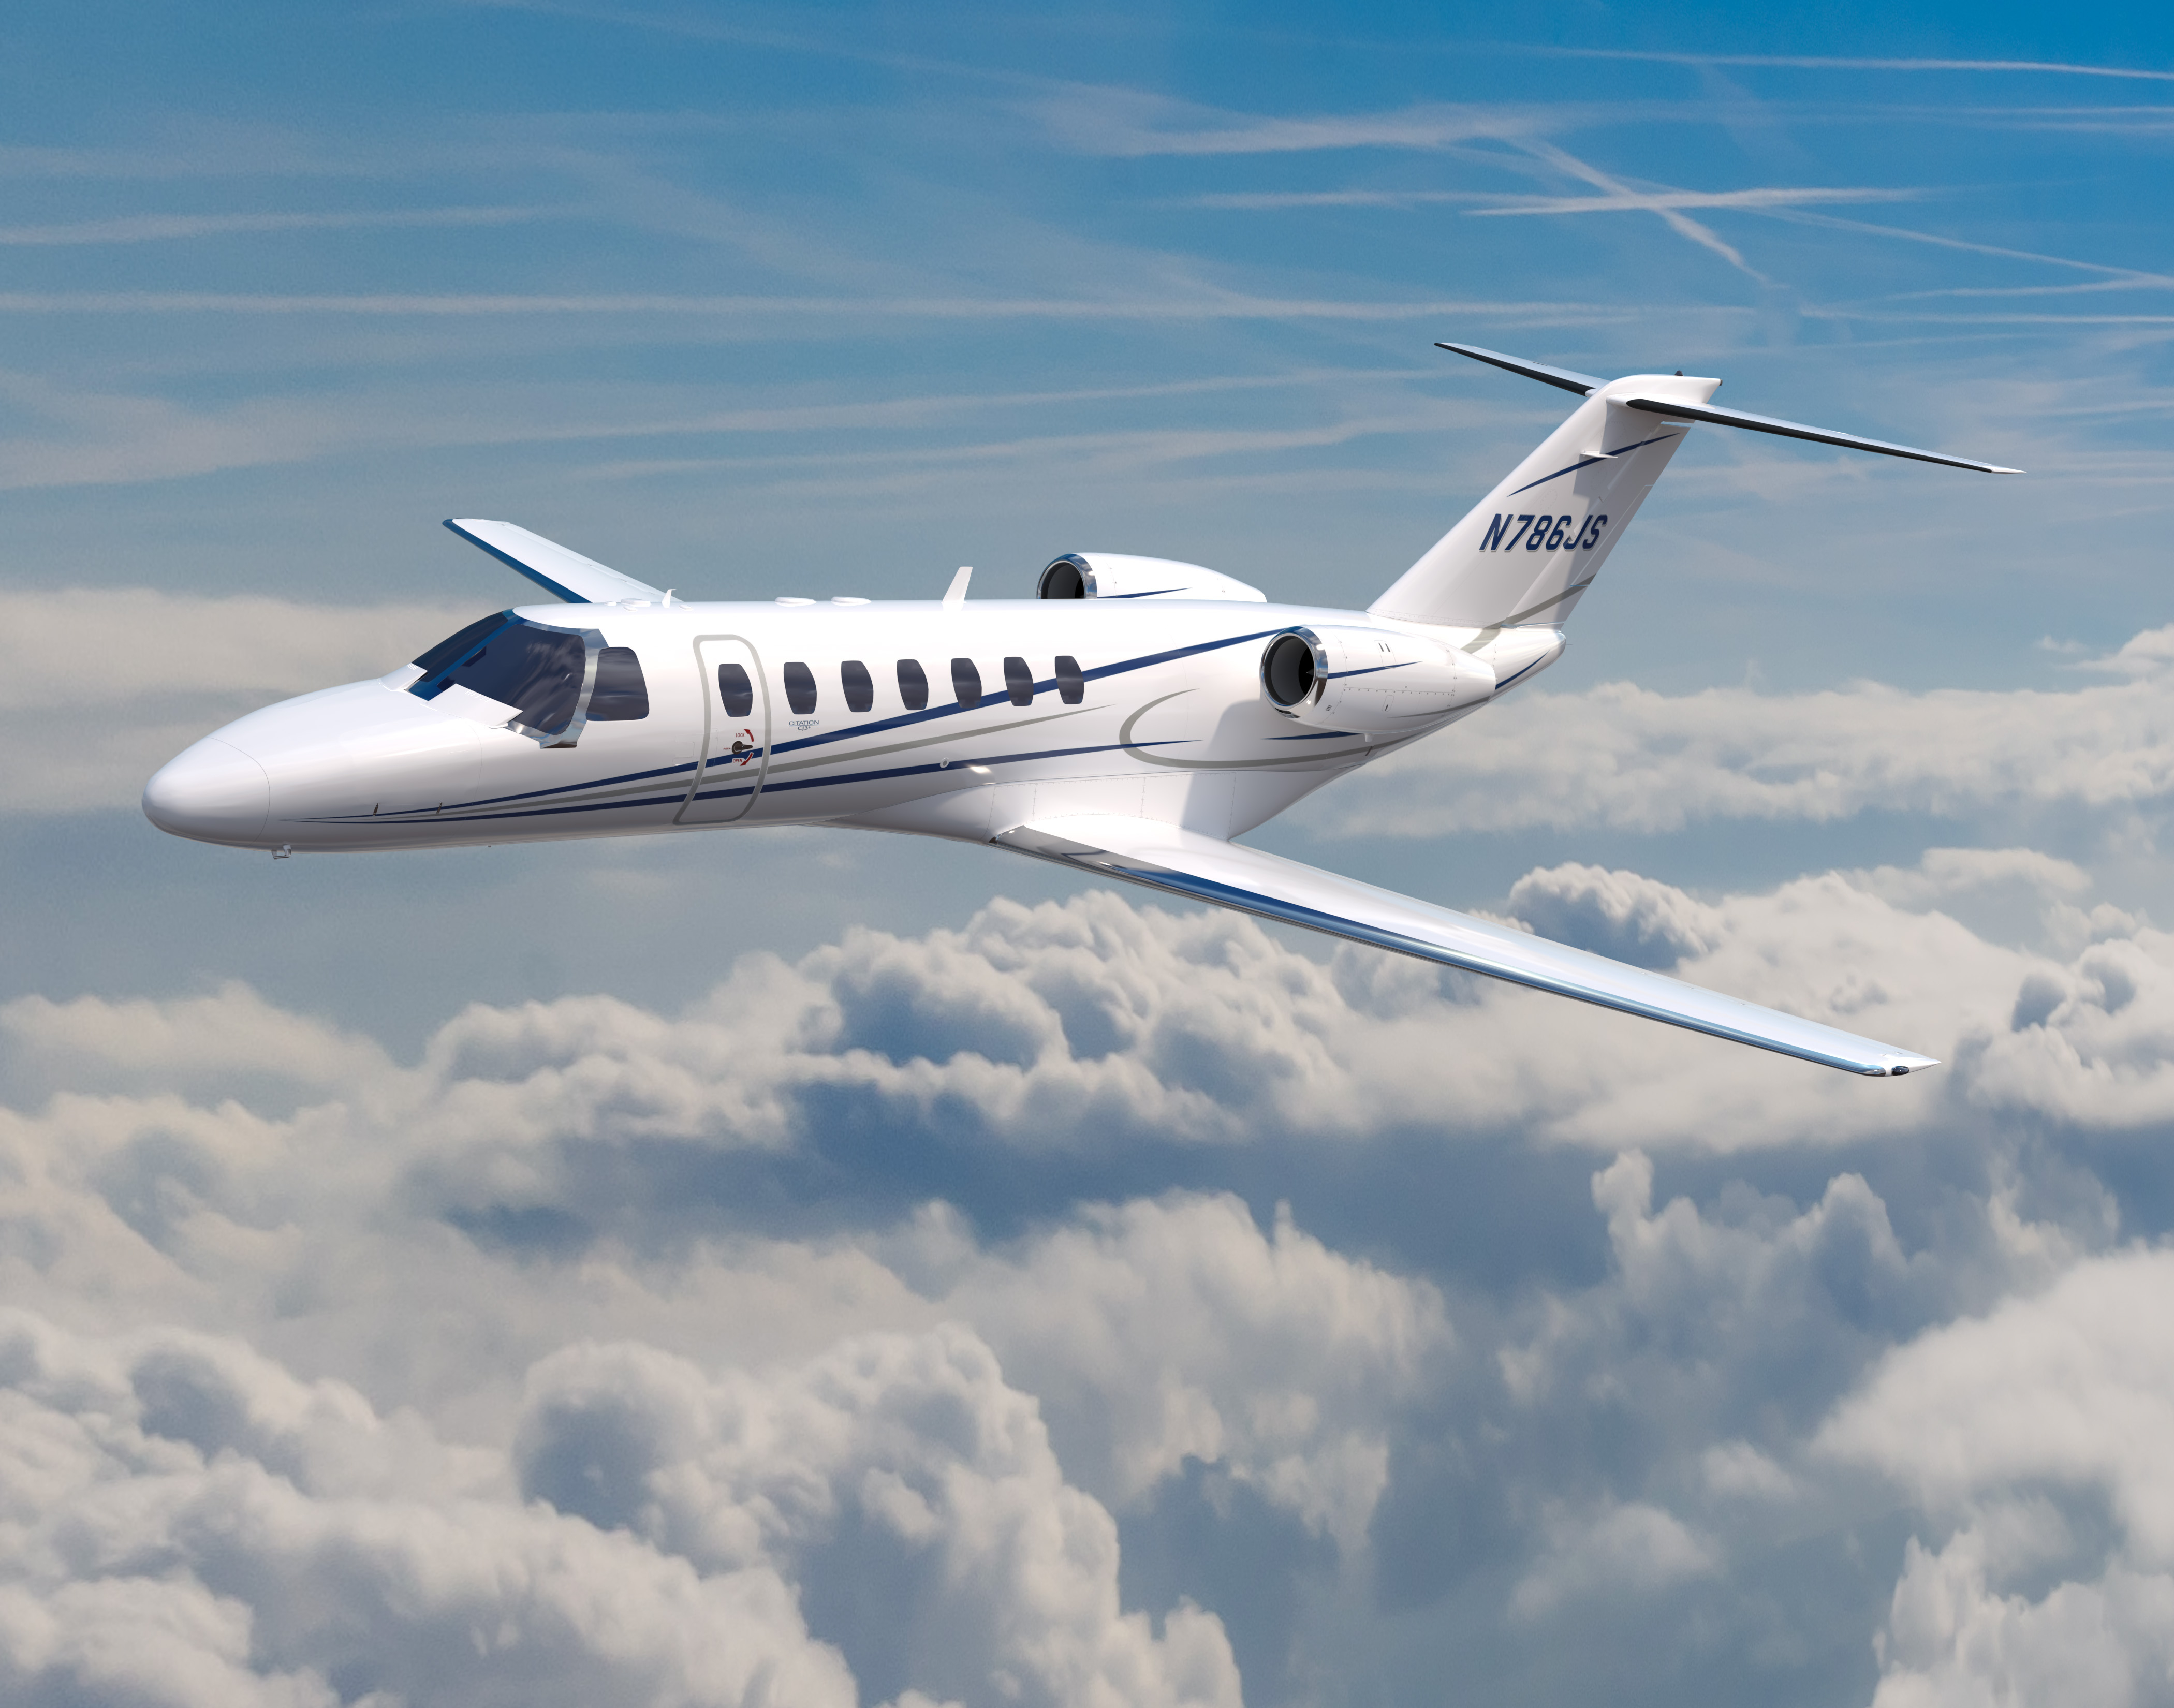 Textron announces order from flyExclusive up to 30 Citation CJ3+ light jets | Business Wire